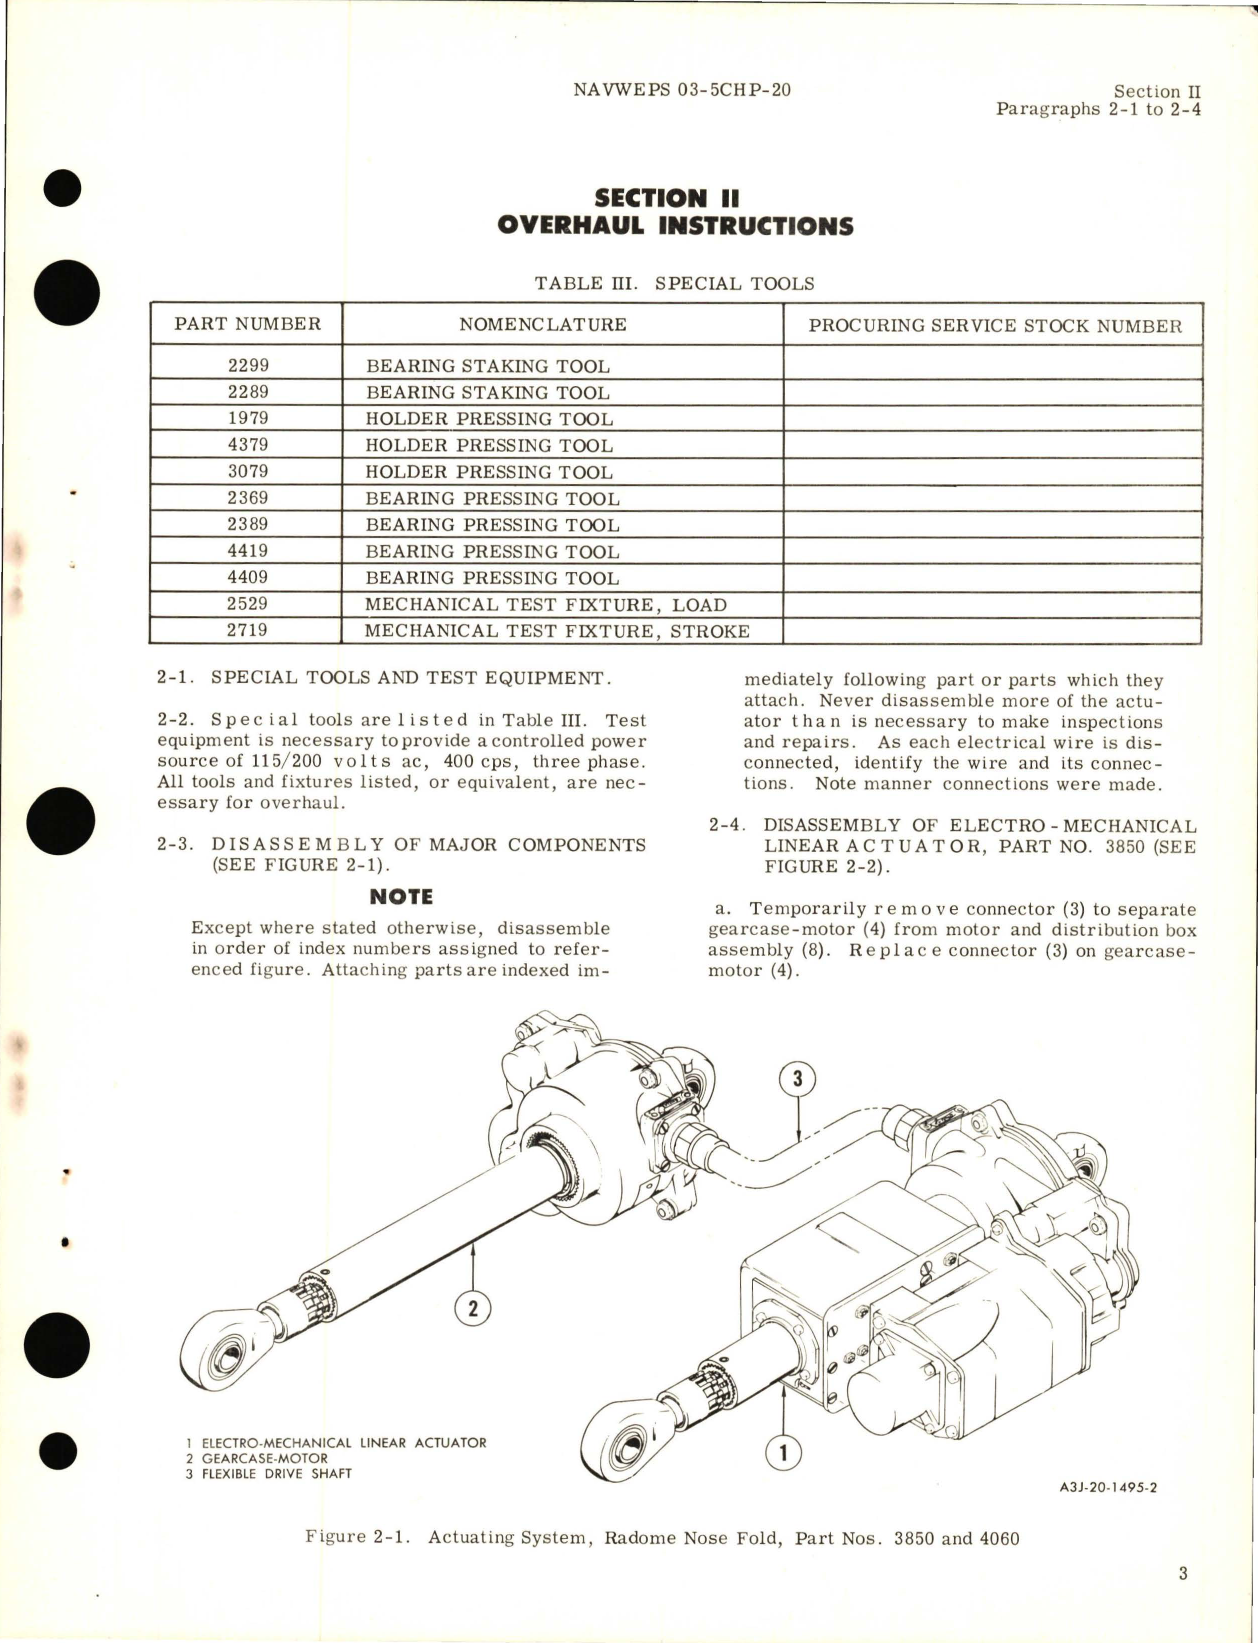 Sample page 7 from AirCorps Library document: Overhaul Instructions for Electro-Mechanical Linear Actuator 3850, 3850-1, 4060, and 4060-1